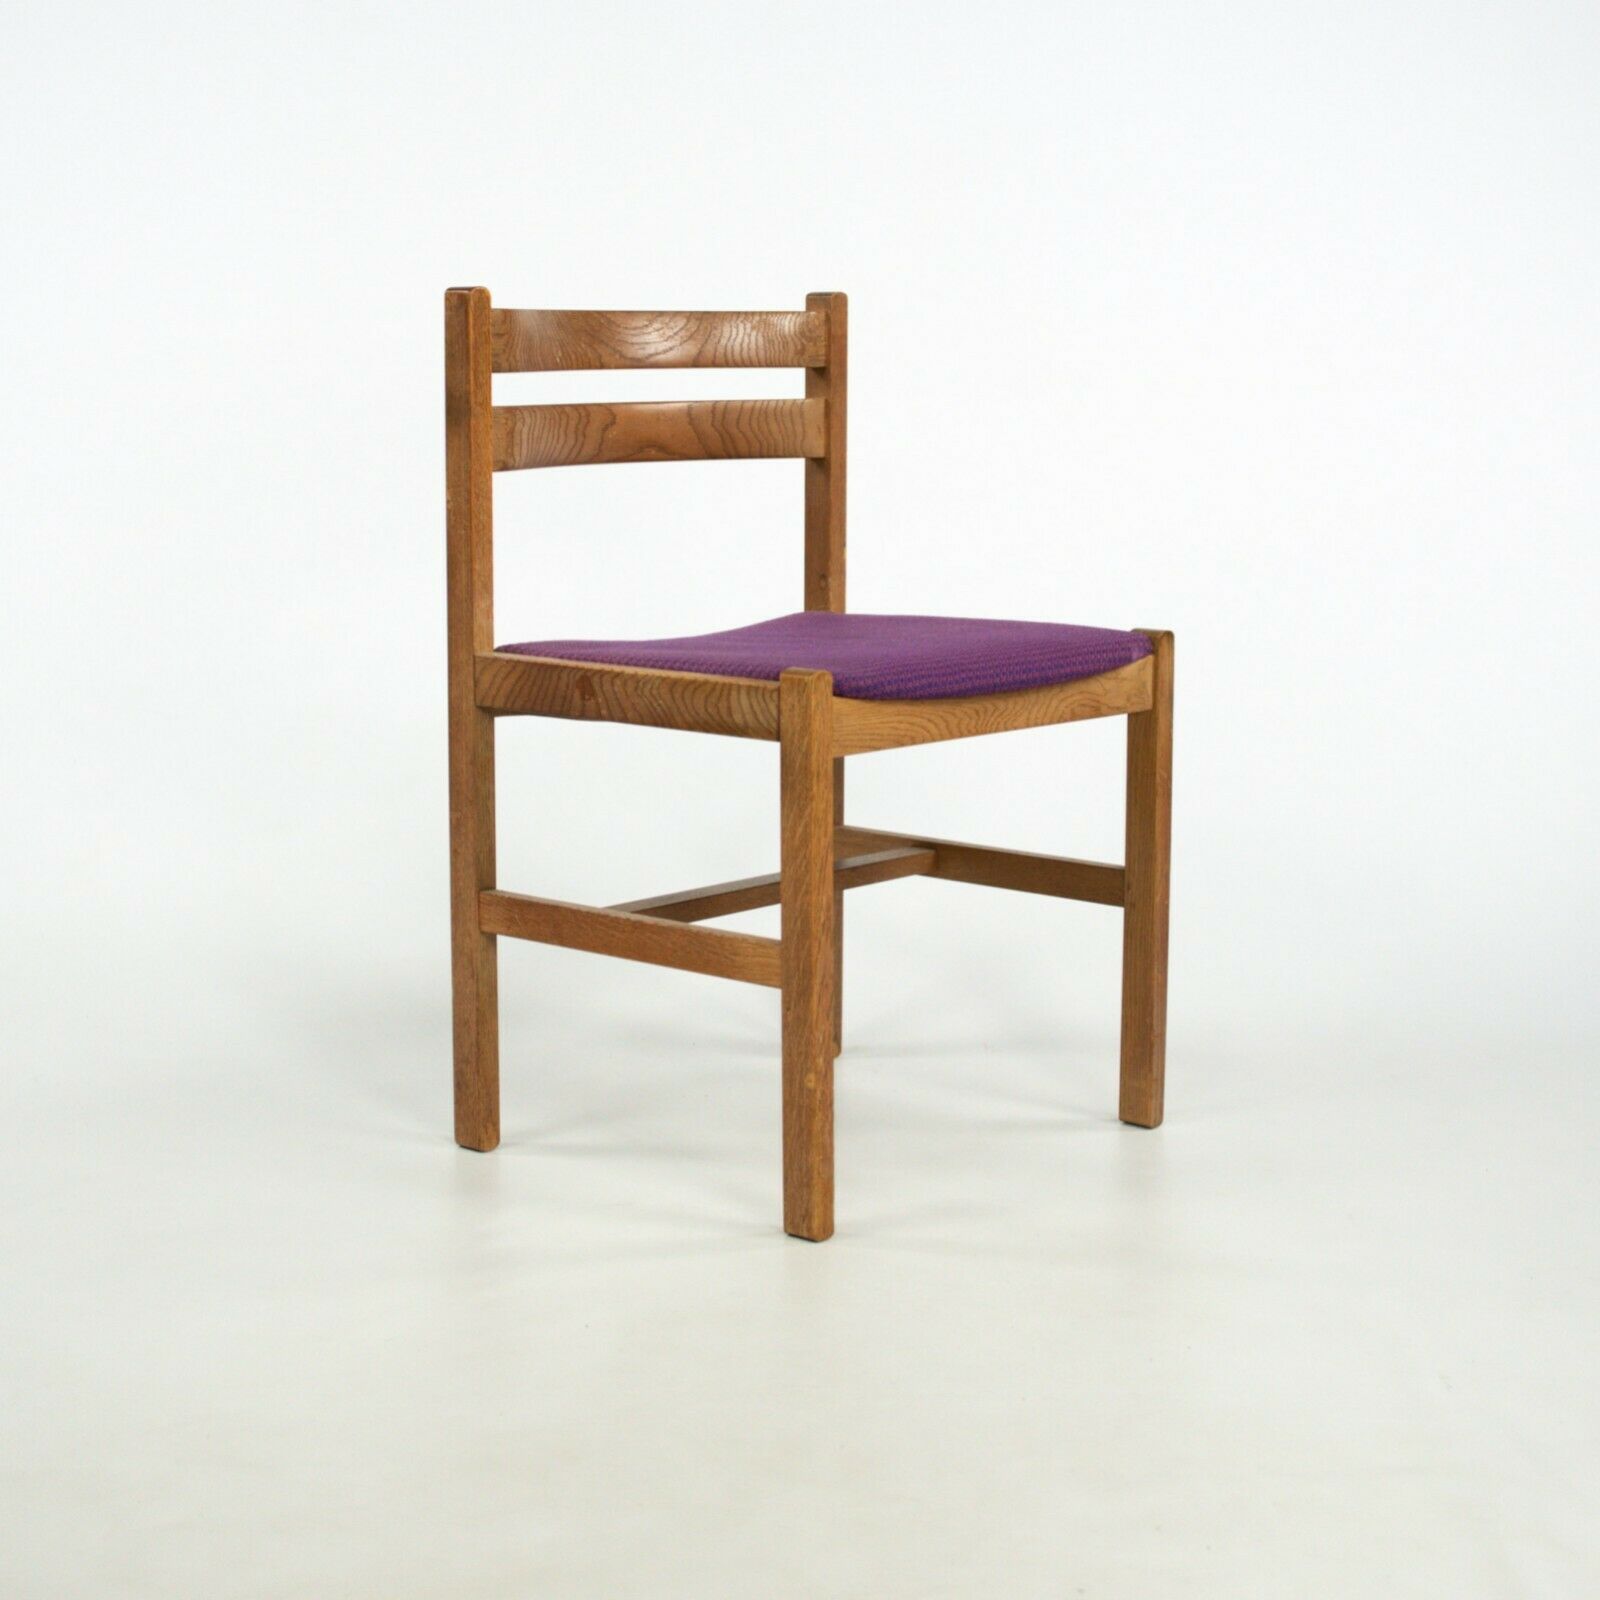 1975 Borge Mogensen "Asserbo" Dining chairs for CI Designs In Oak Set of 4